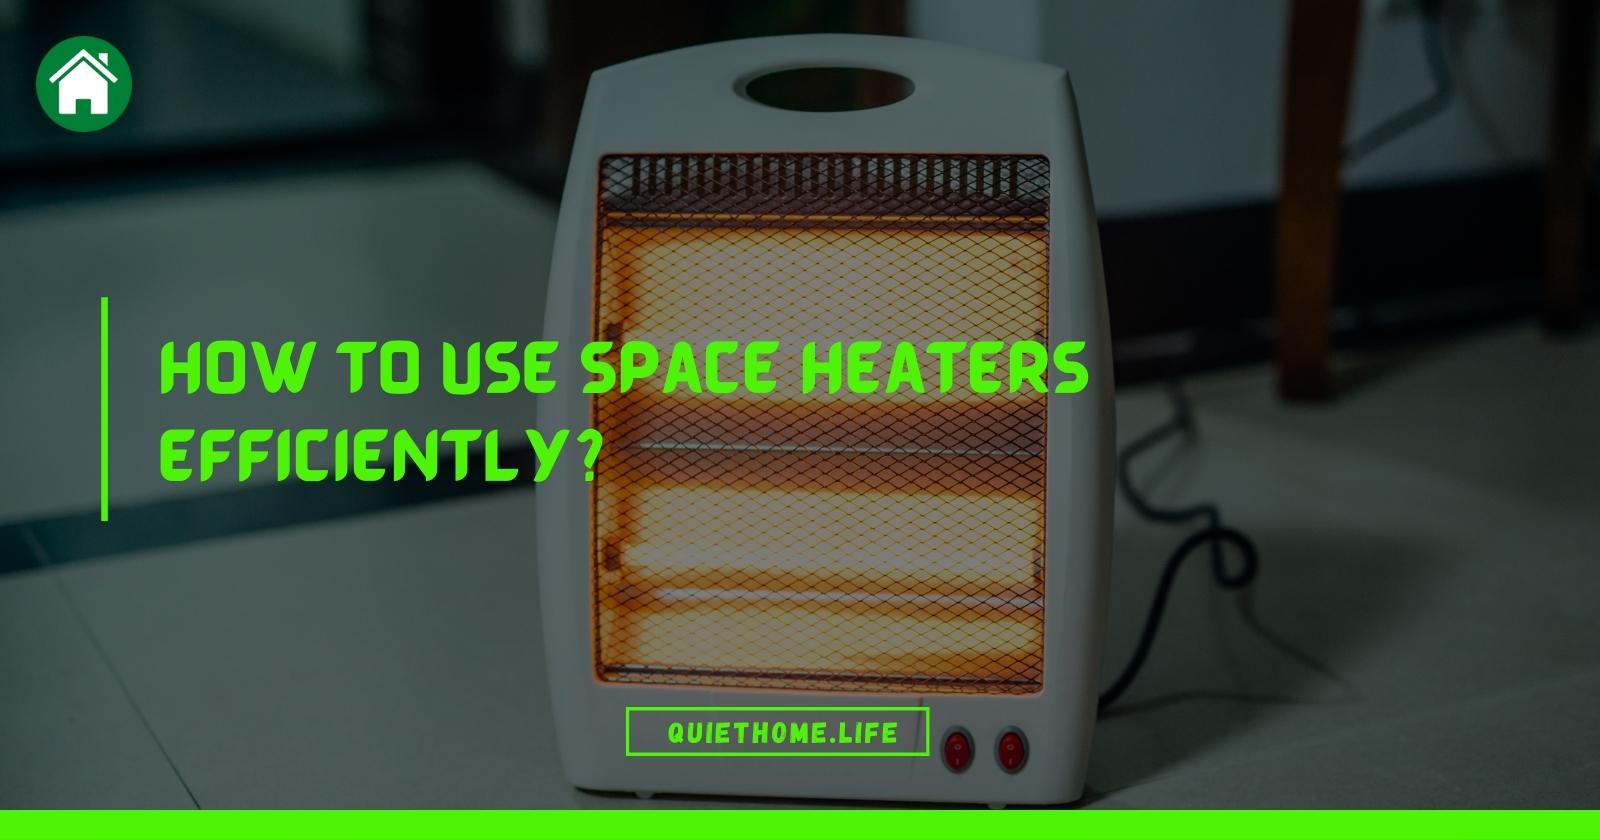 How to Use Space Heaters Efficiently